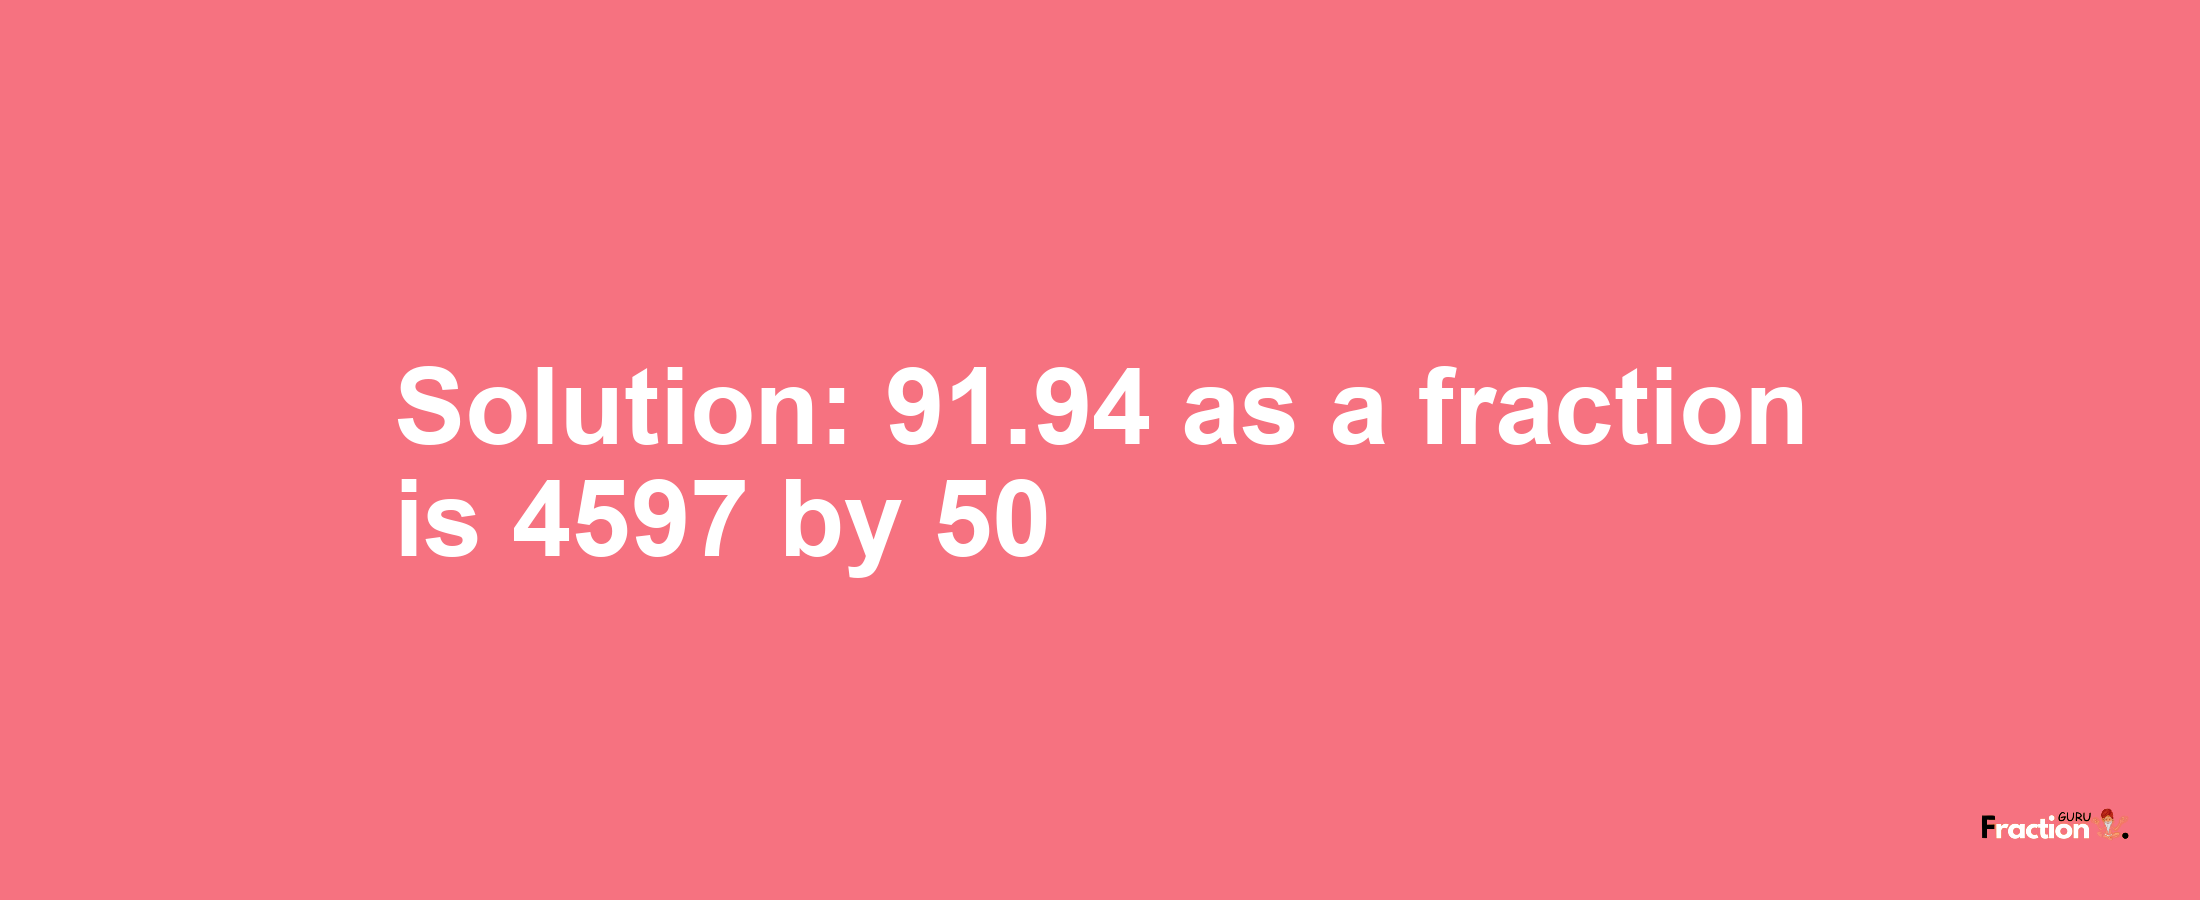 Solution:91.94 as a fraction is 4597/50